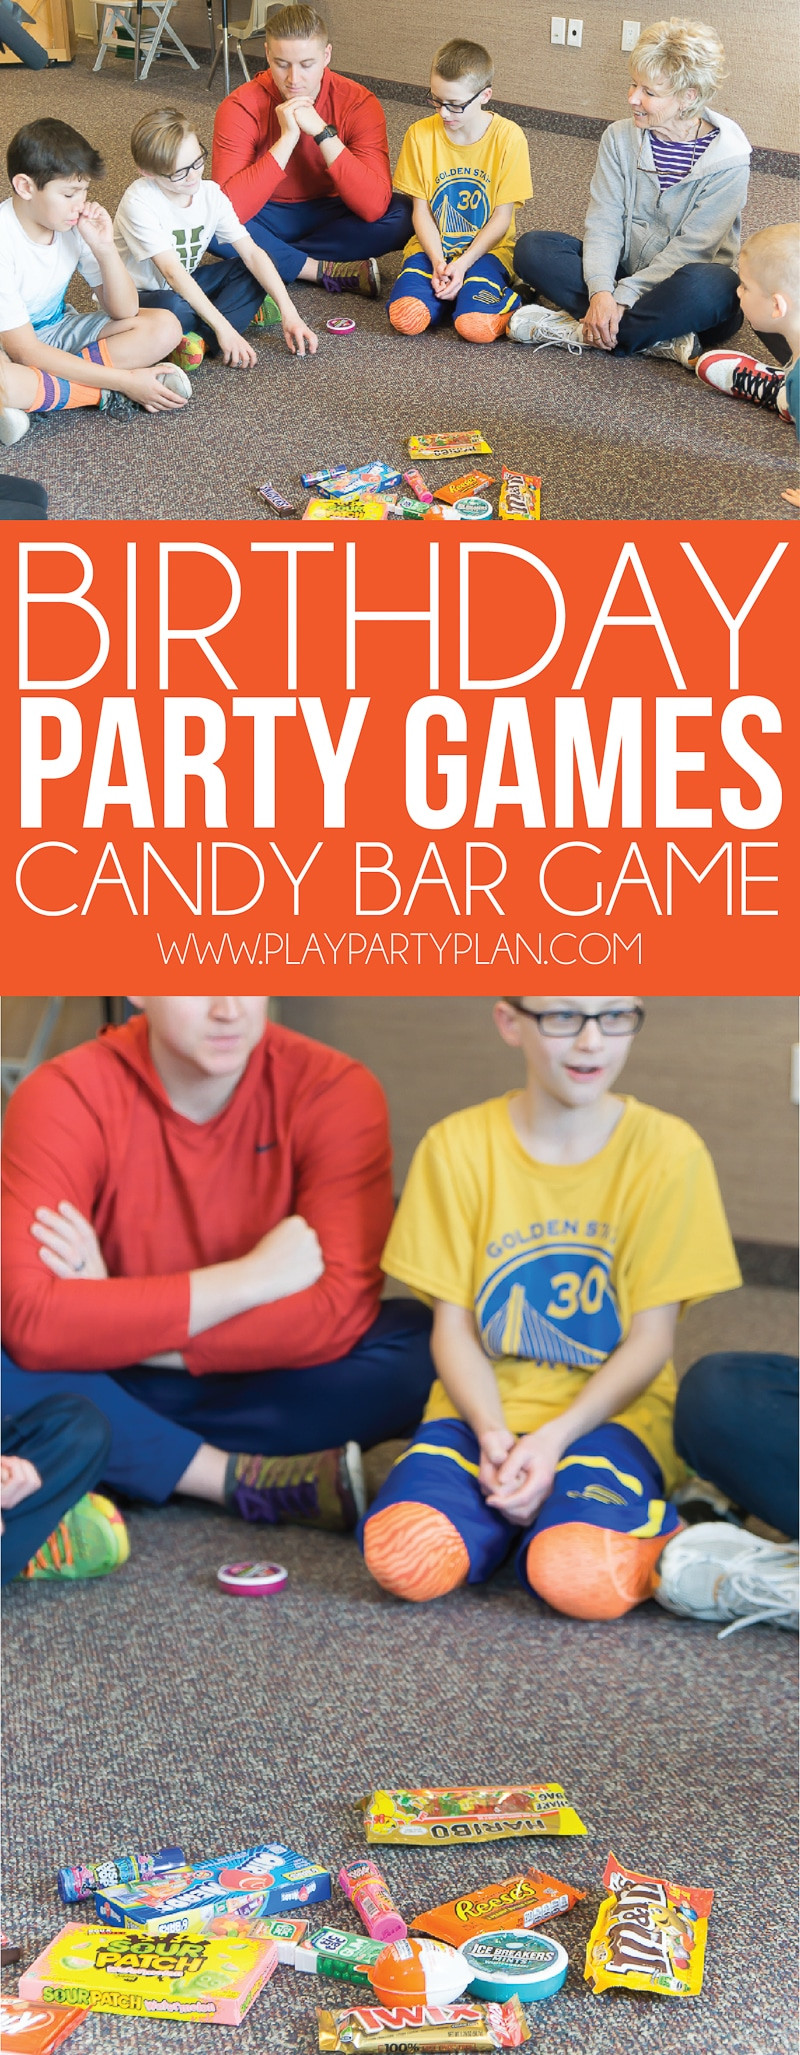 Child Birthday Party Games
 Hilarious Birthday Party Games for Kids & Adults Play